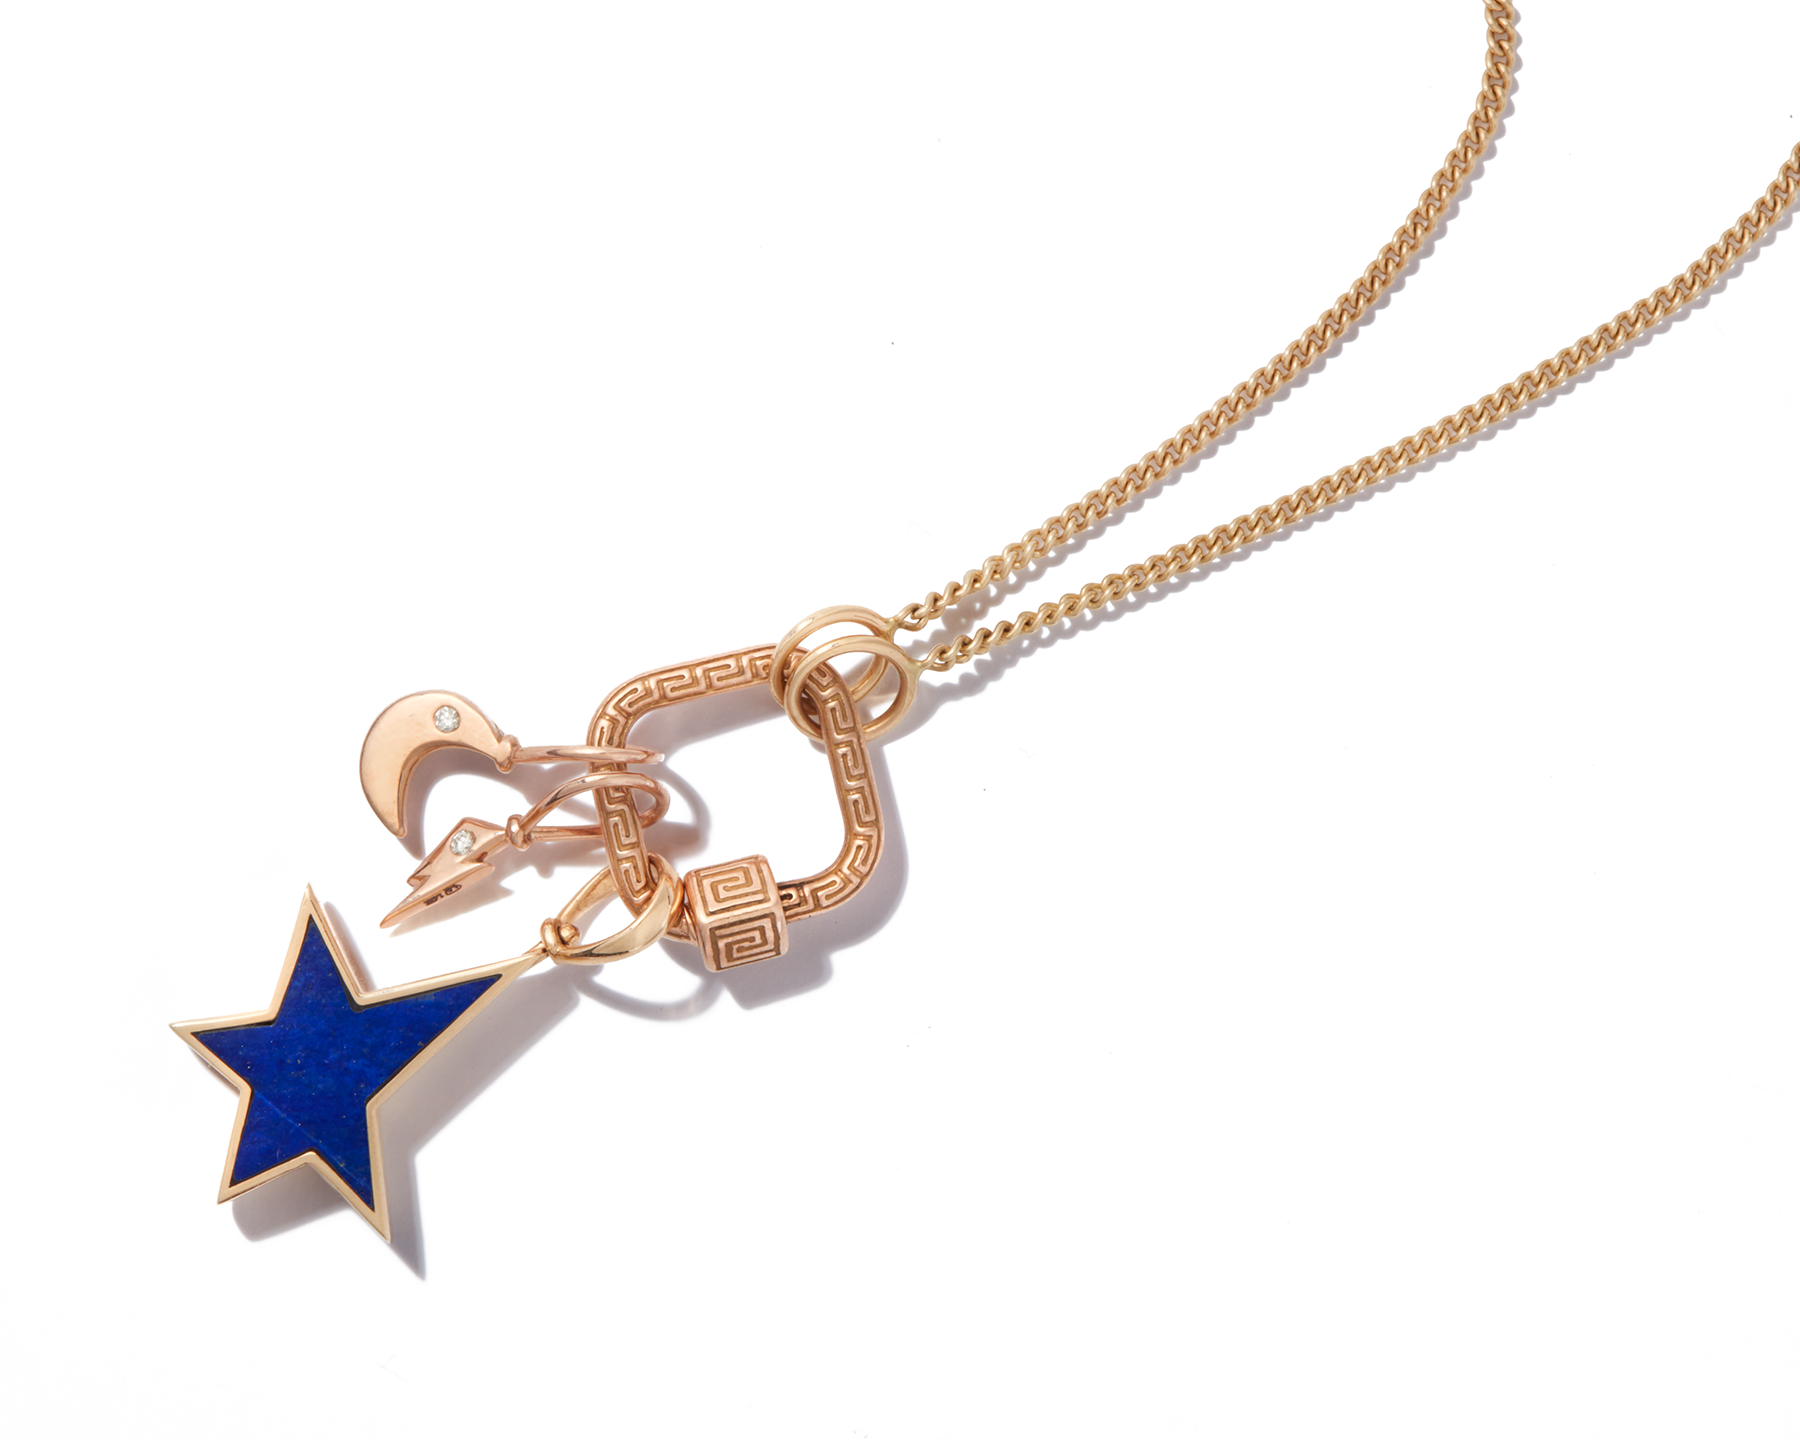 Close up of gold necklace with tiny gold charms for necklace and blue star charm